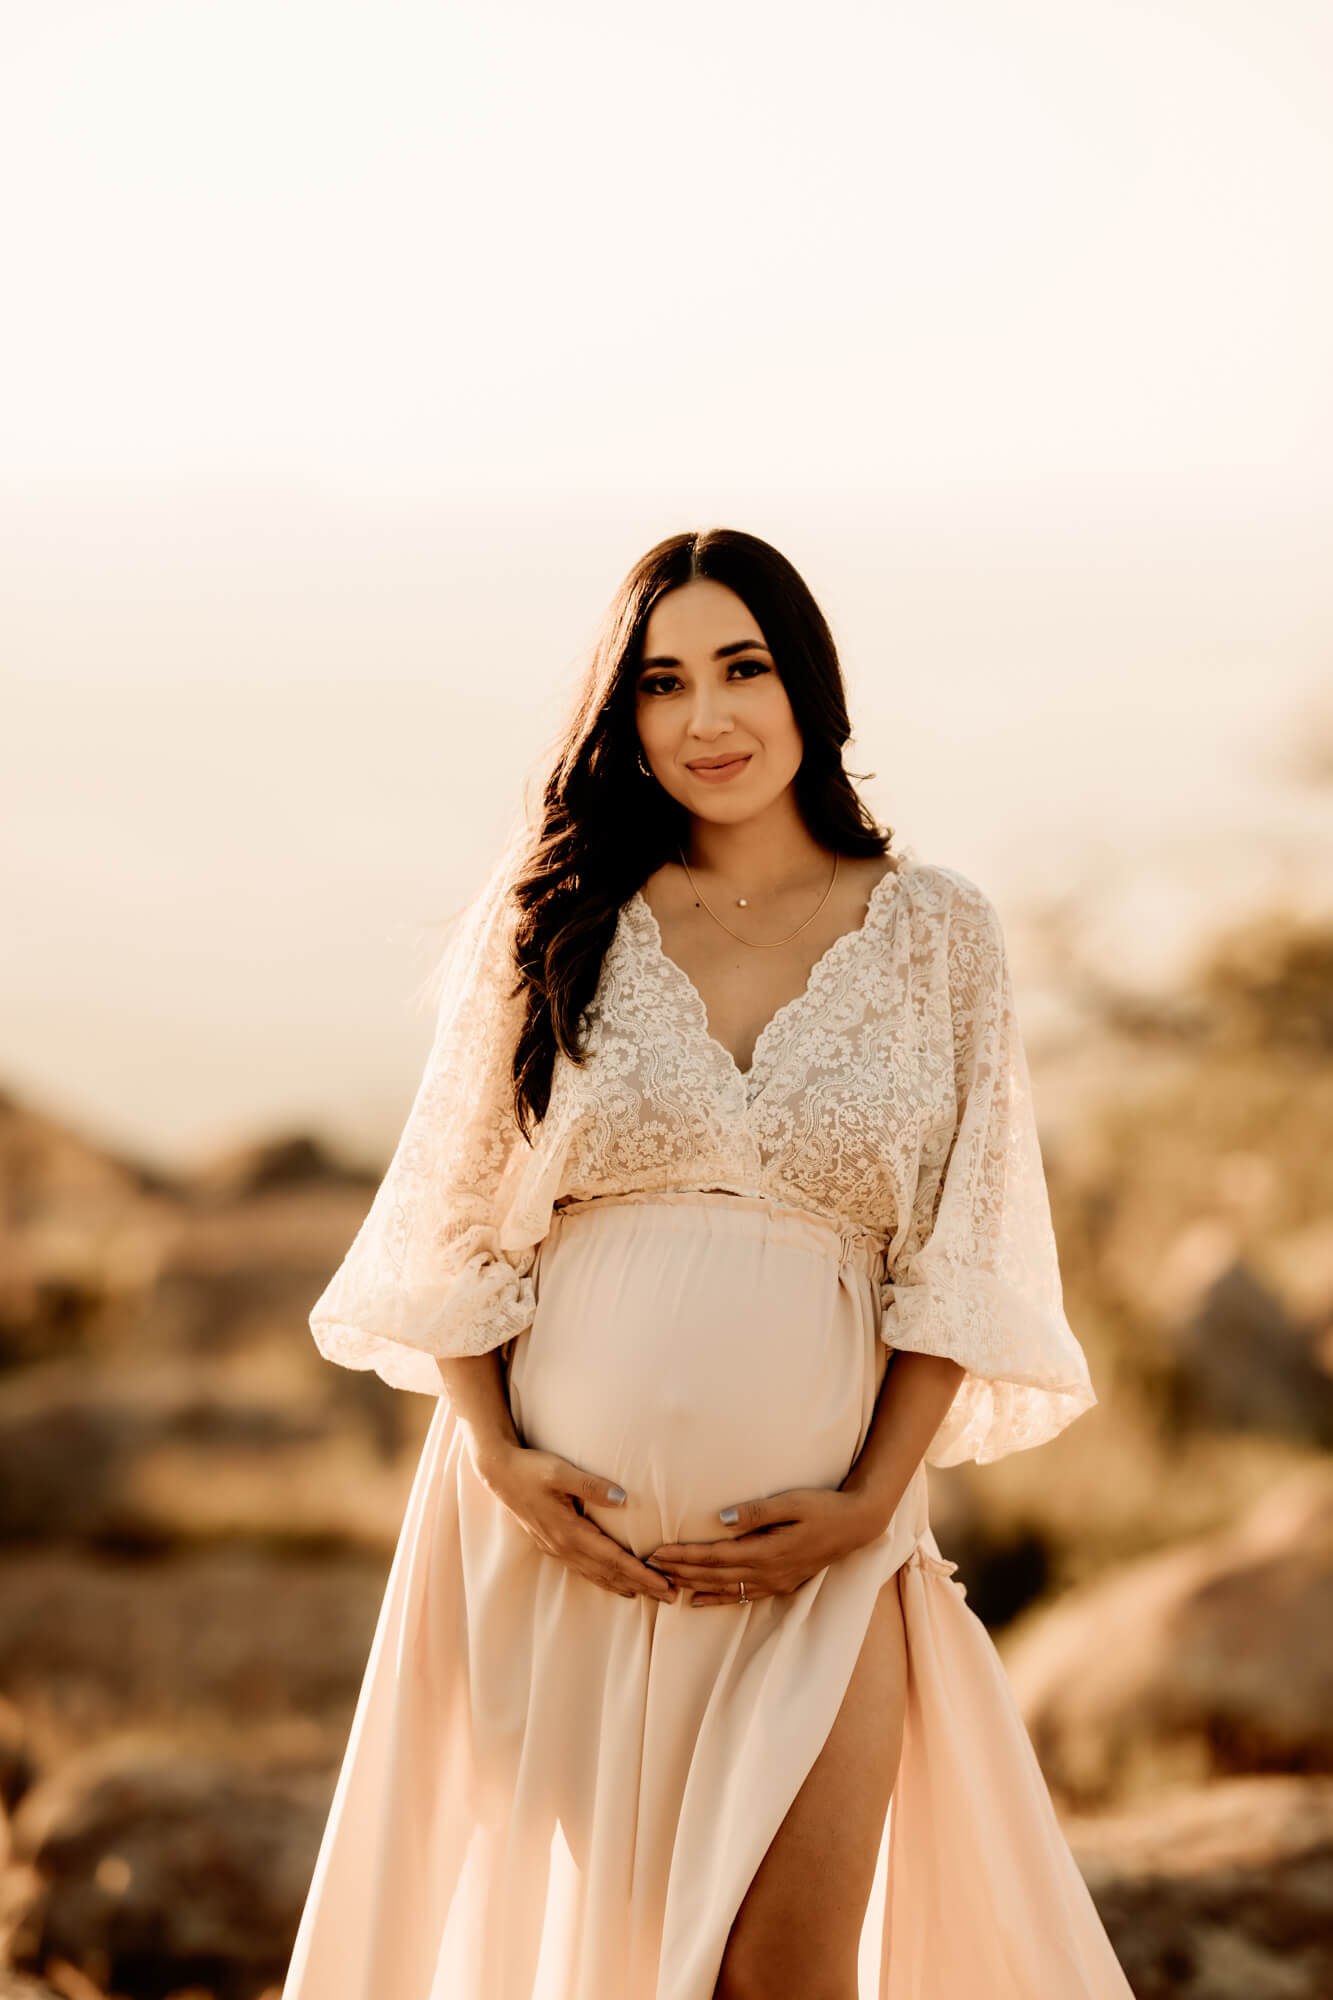 Expecting mother holds her baby bump while wearing a white dress, Modern Village Midwifery.